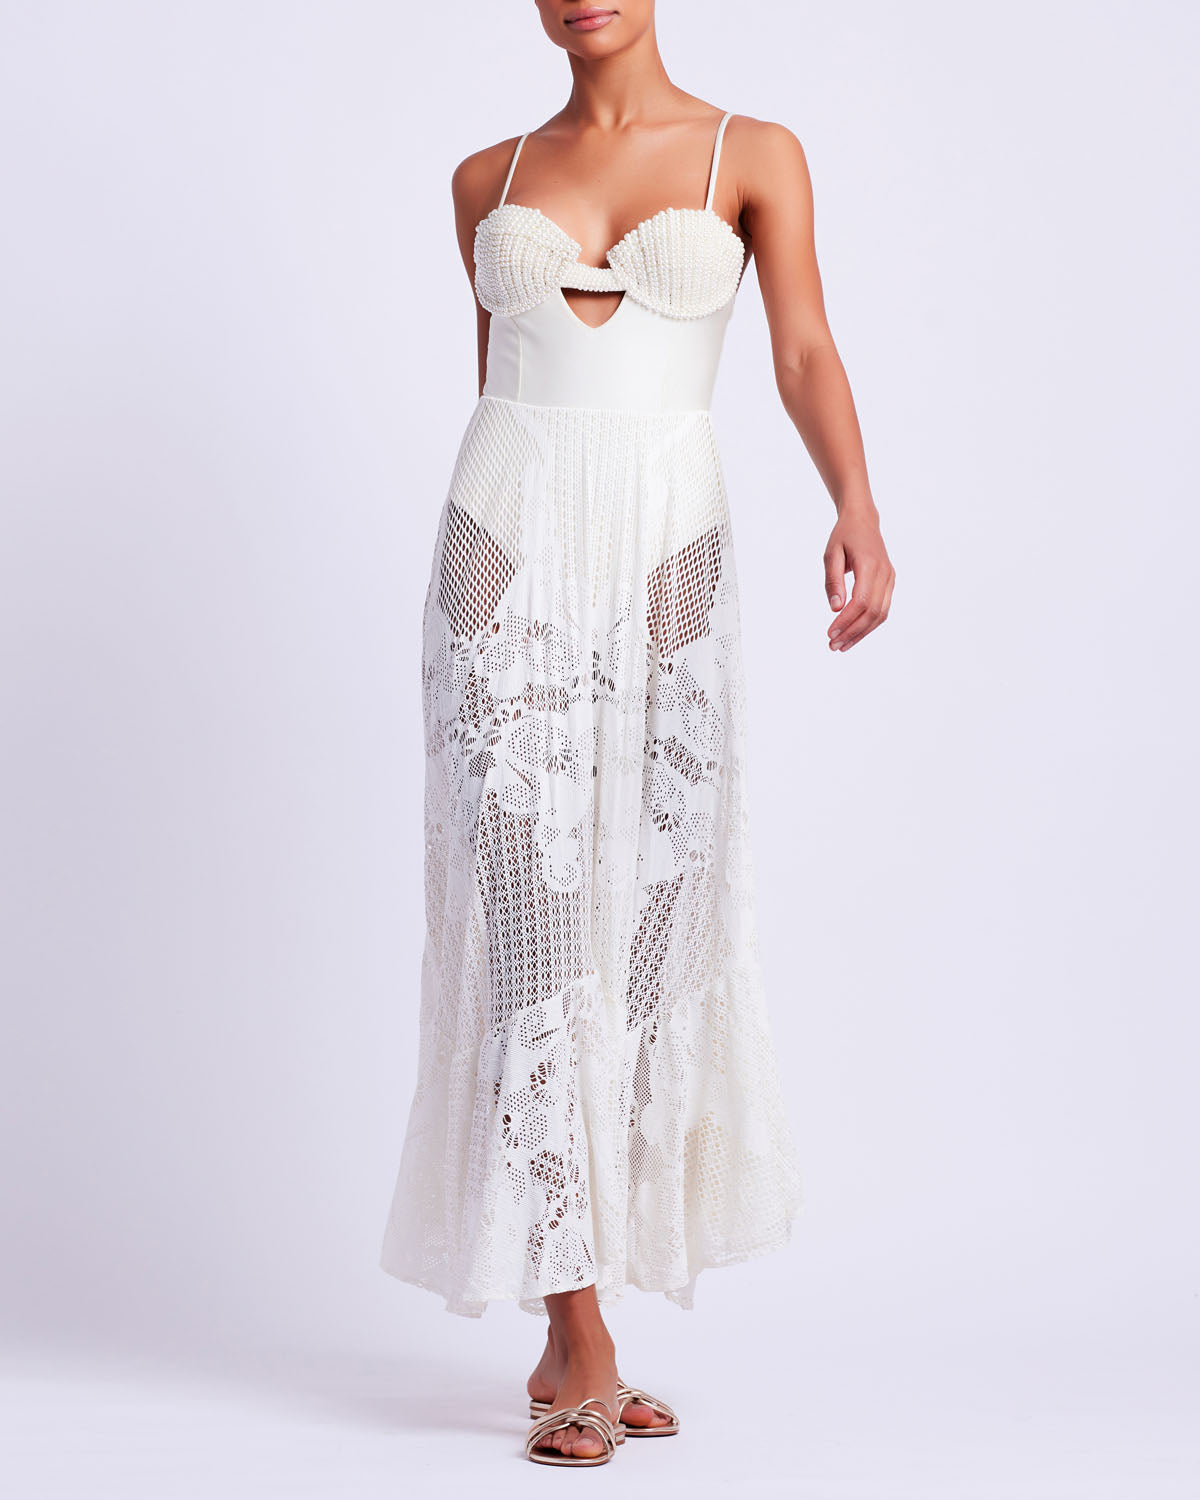 Pearl Beaded Bustier Beach Dress (EXCLUSIVE)